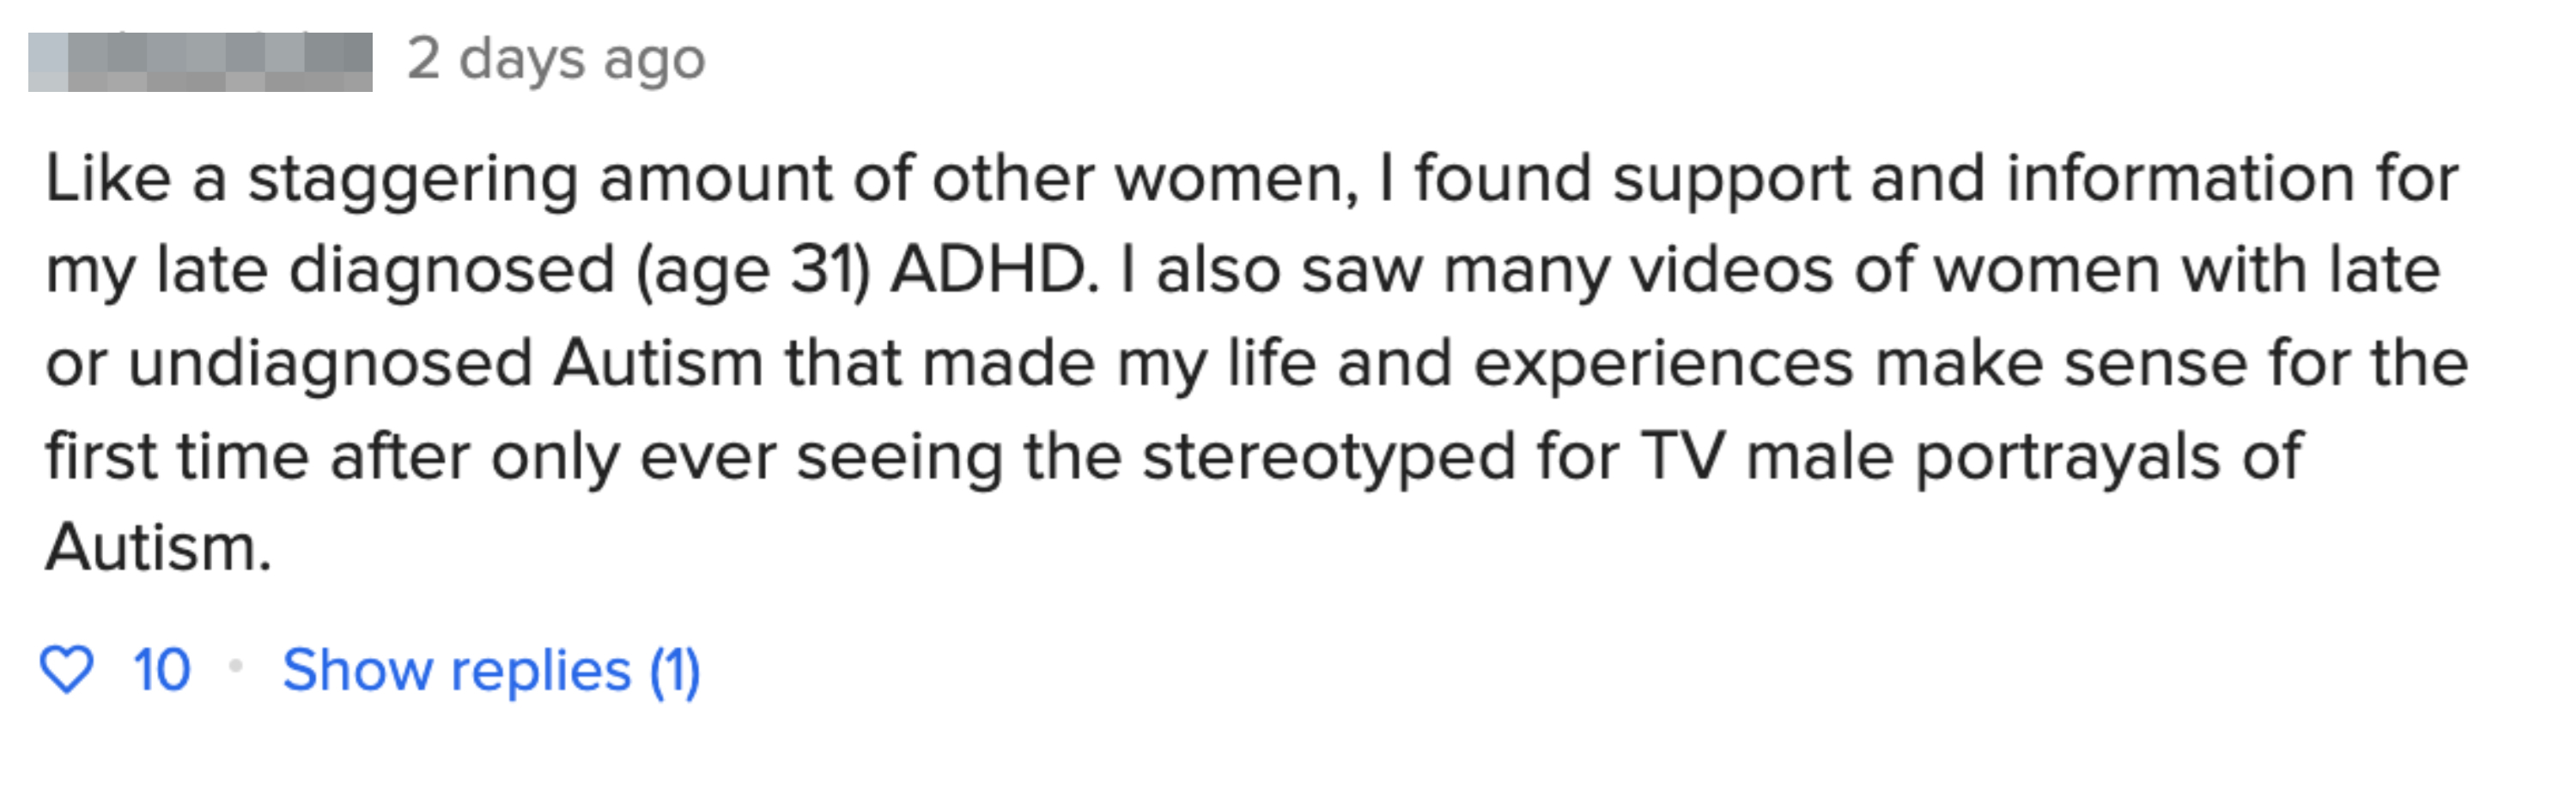 Woman shares finding support for her late diagnosed ADHD and relating to videos of women with Autism